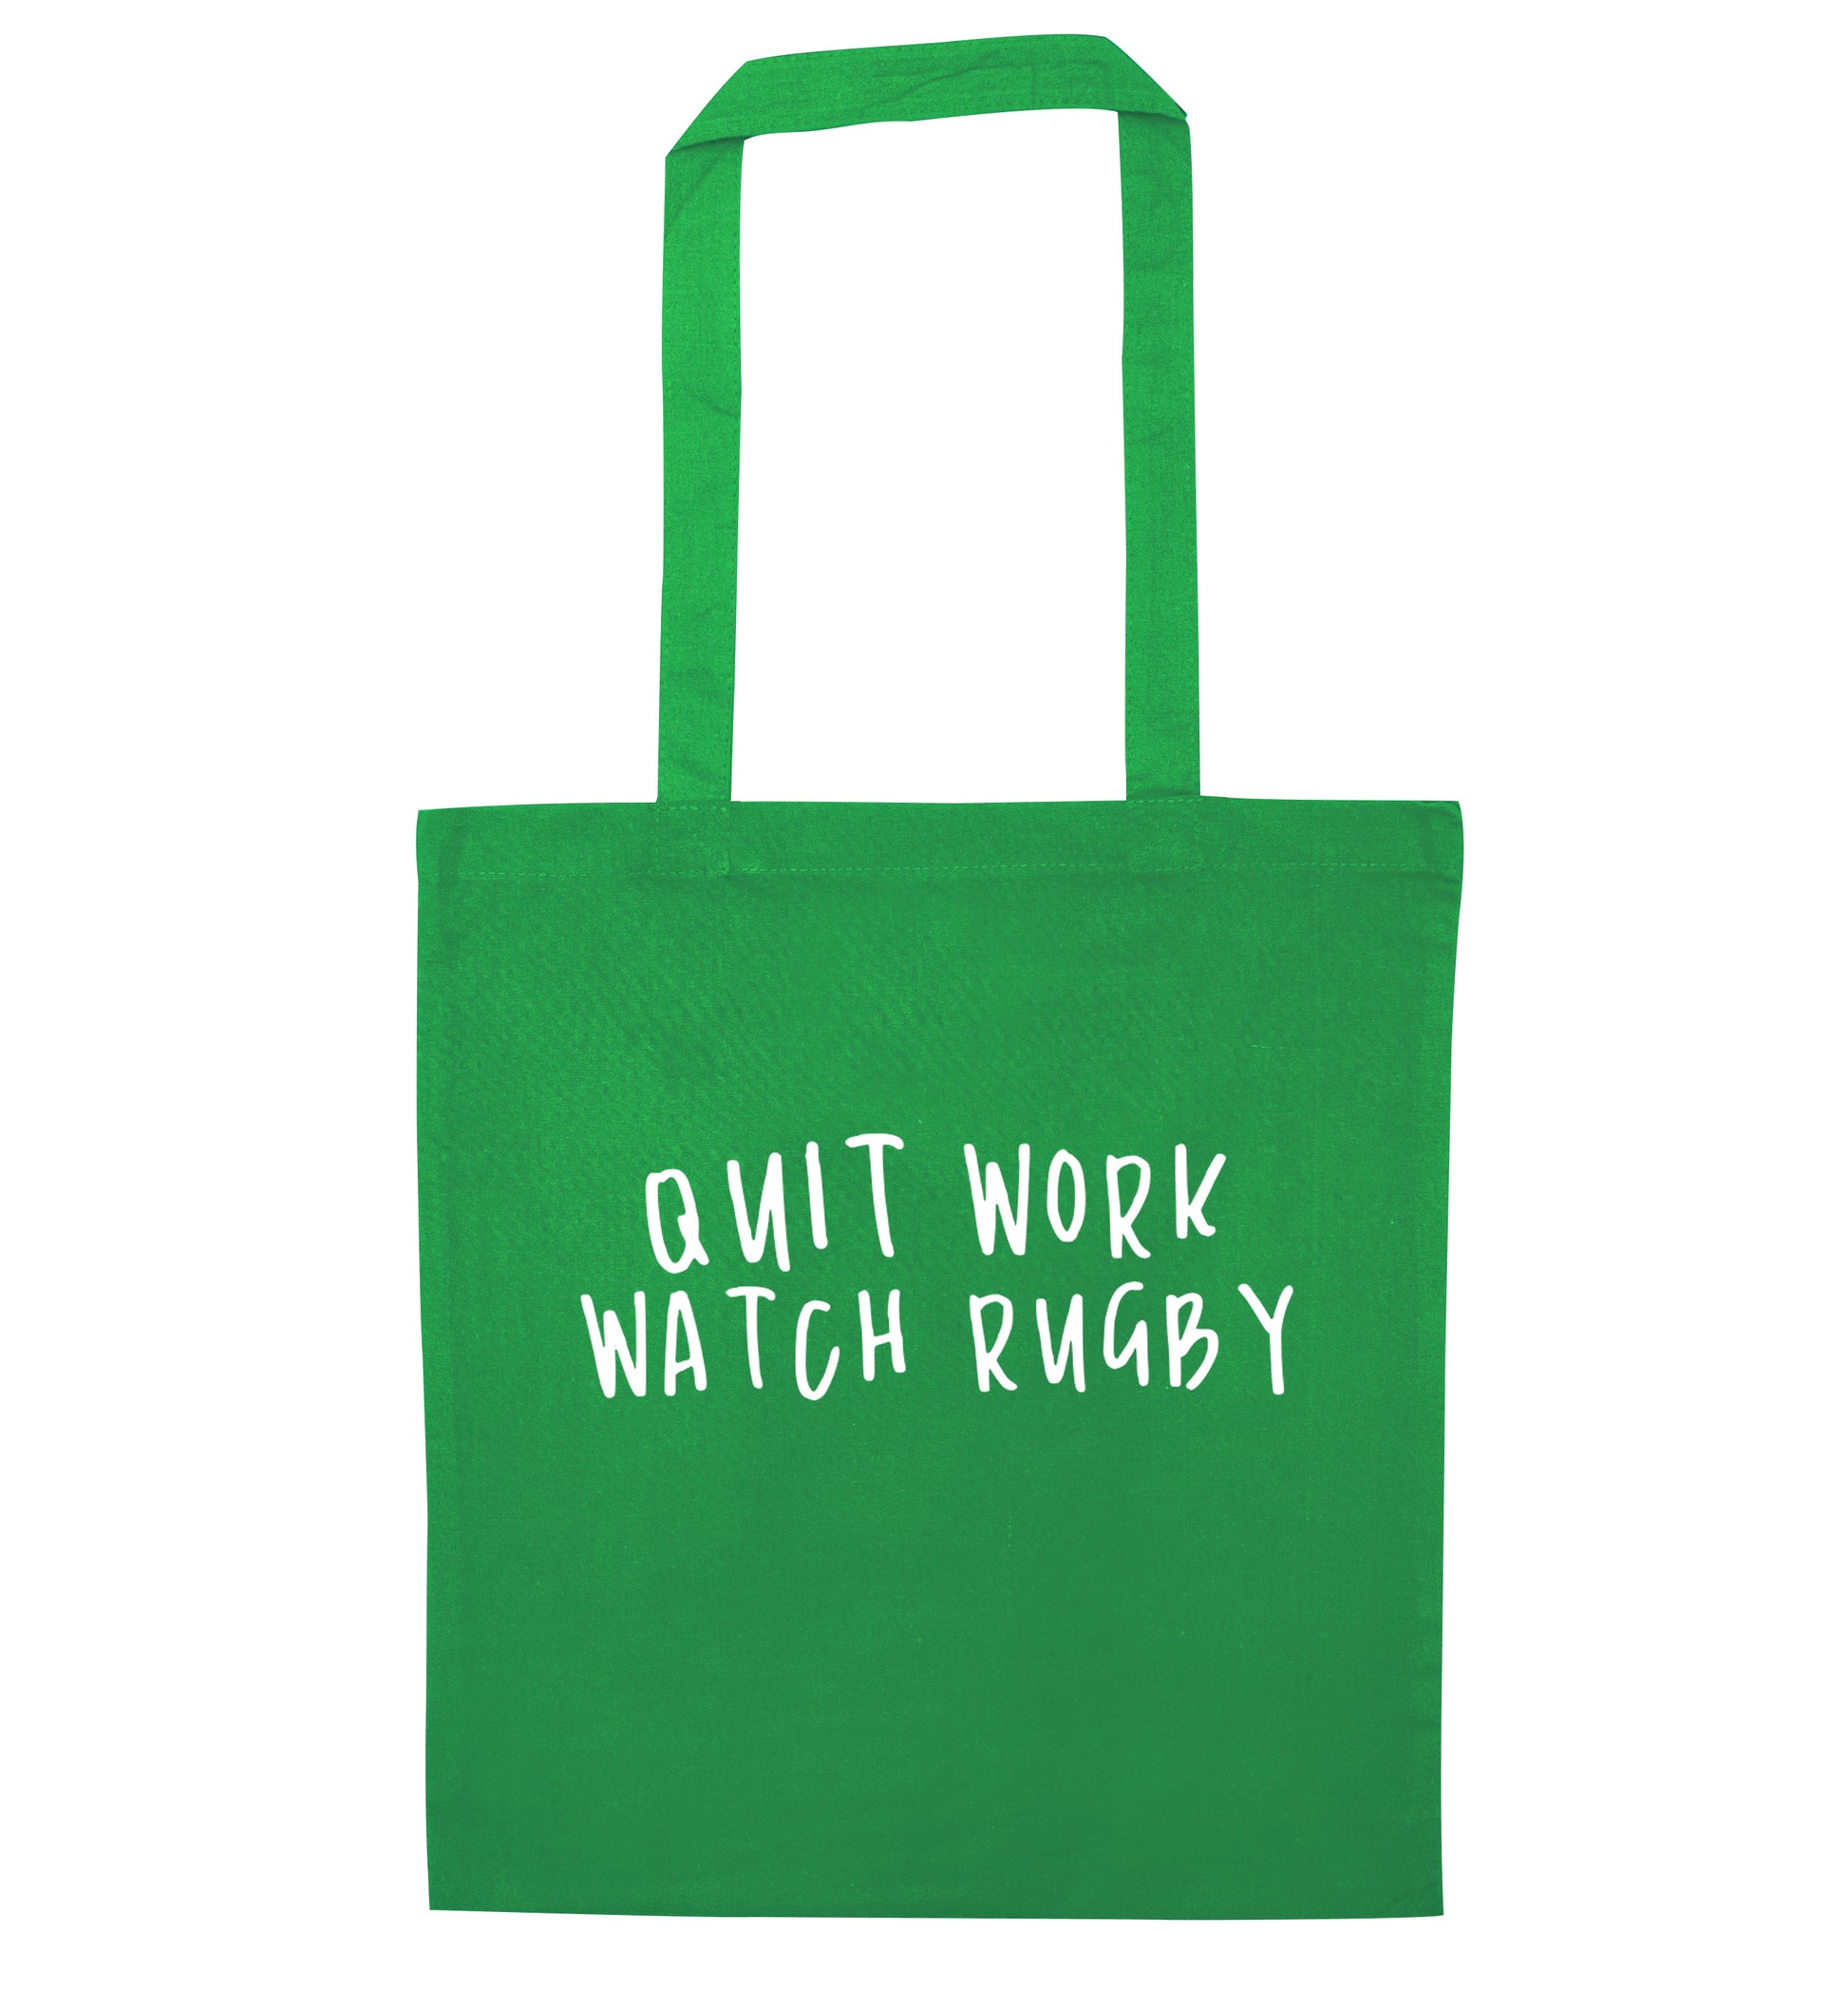 Quit work watch rugby green tote bag